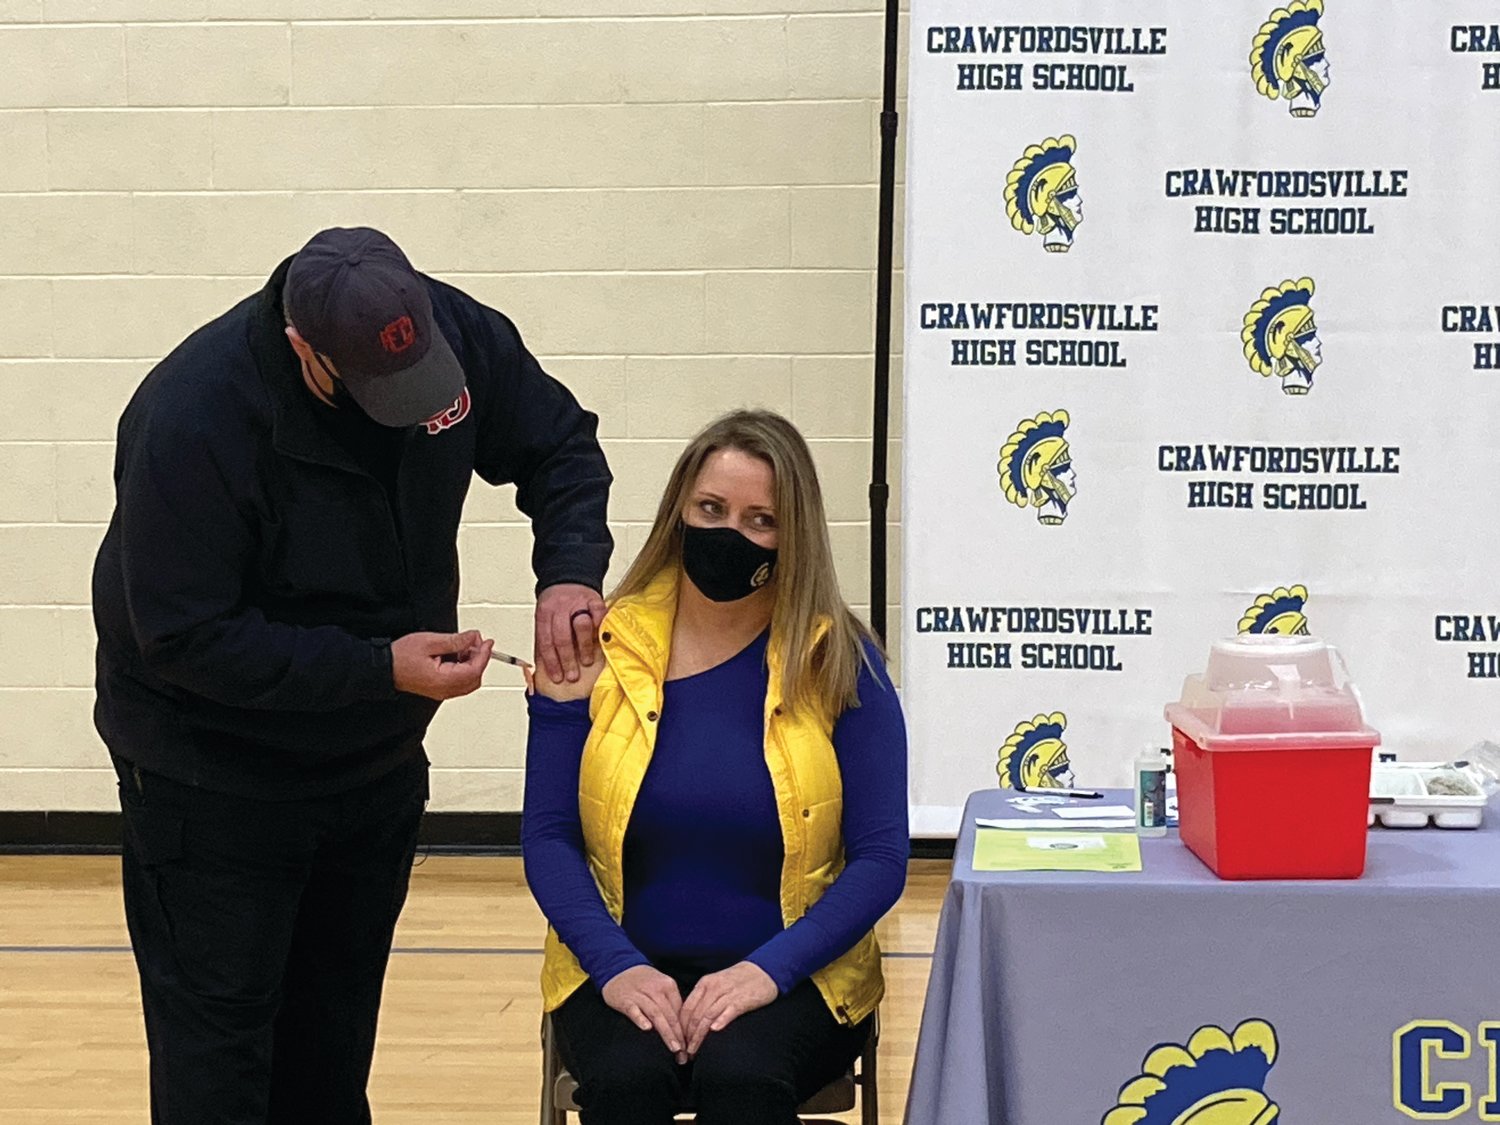 Carrie Jones, a fifth grade teacher at Hoover Elementary, receives a COVID-19 vaccine from community paramedic Joe Crane at Crawfordsville High School on Monday.